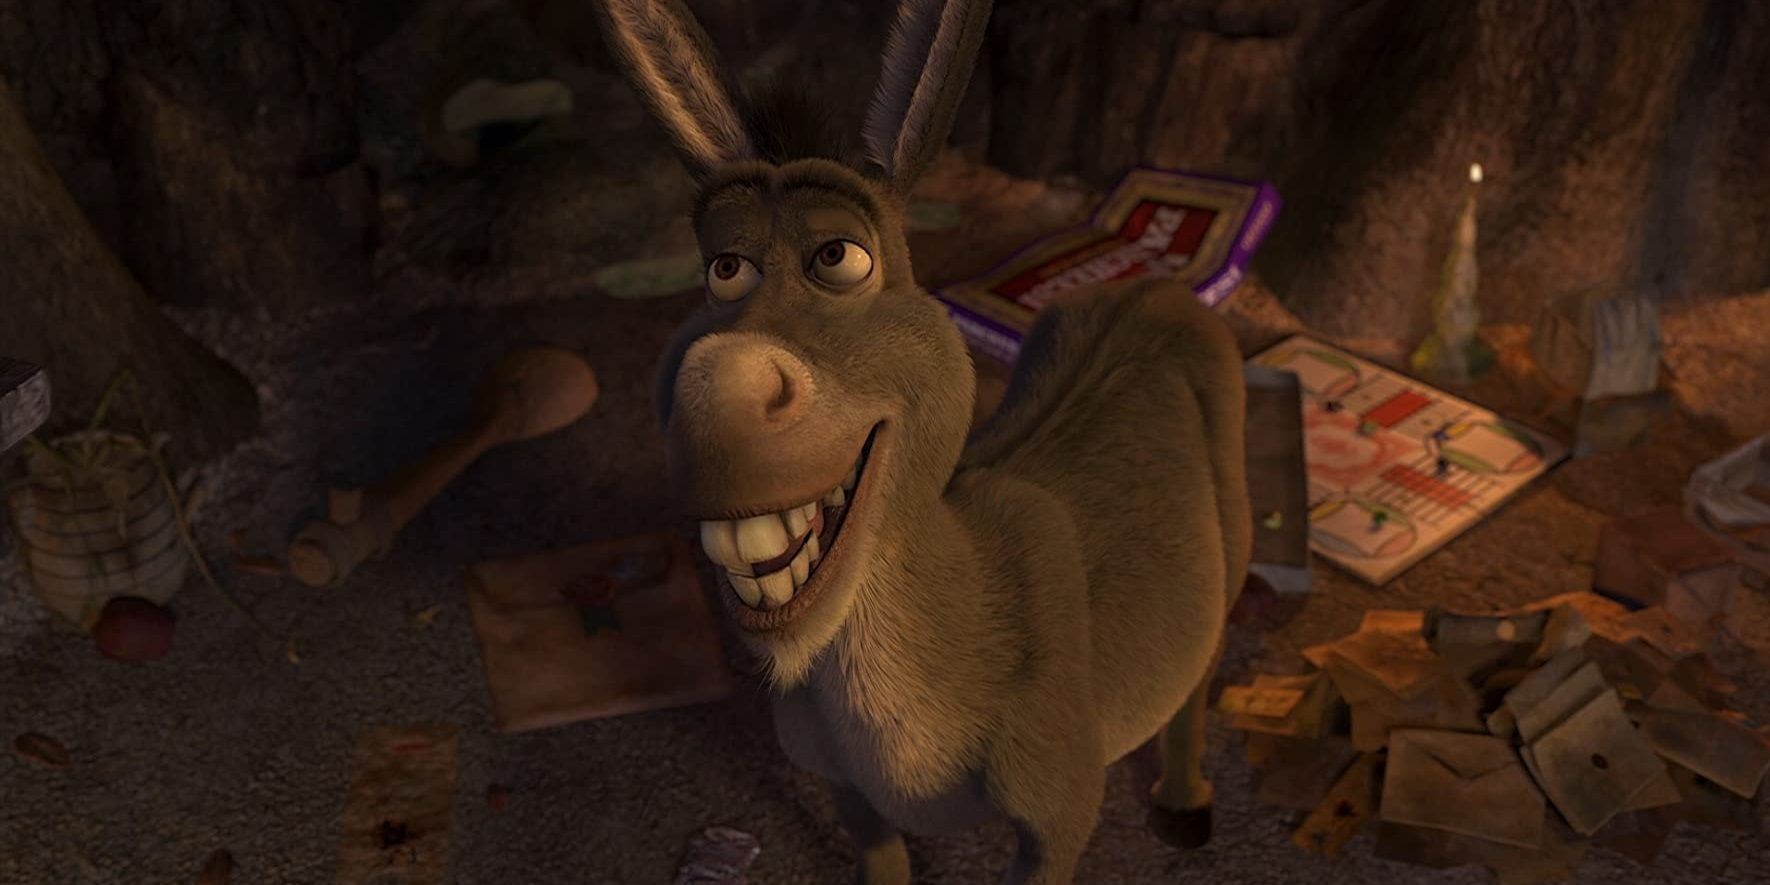 Donkey looking up and smiling in Shrek